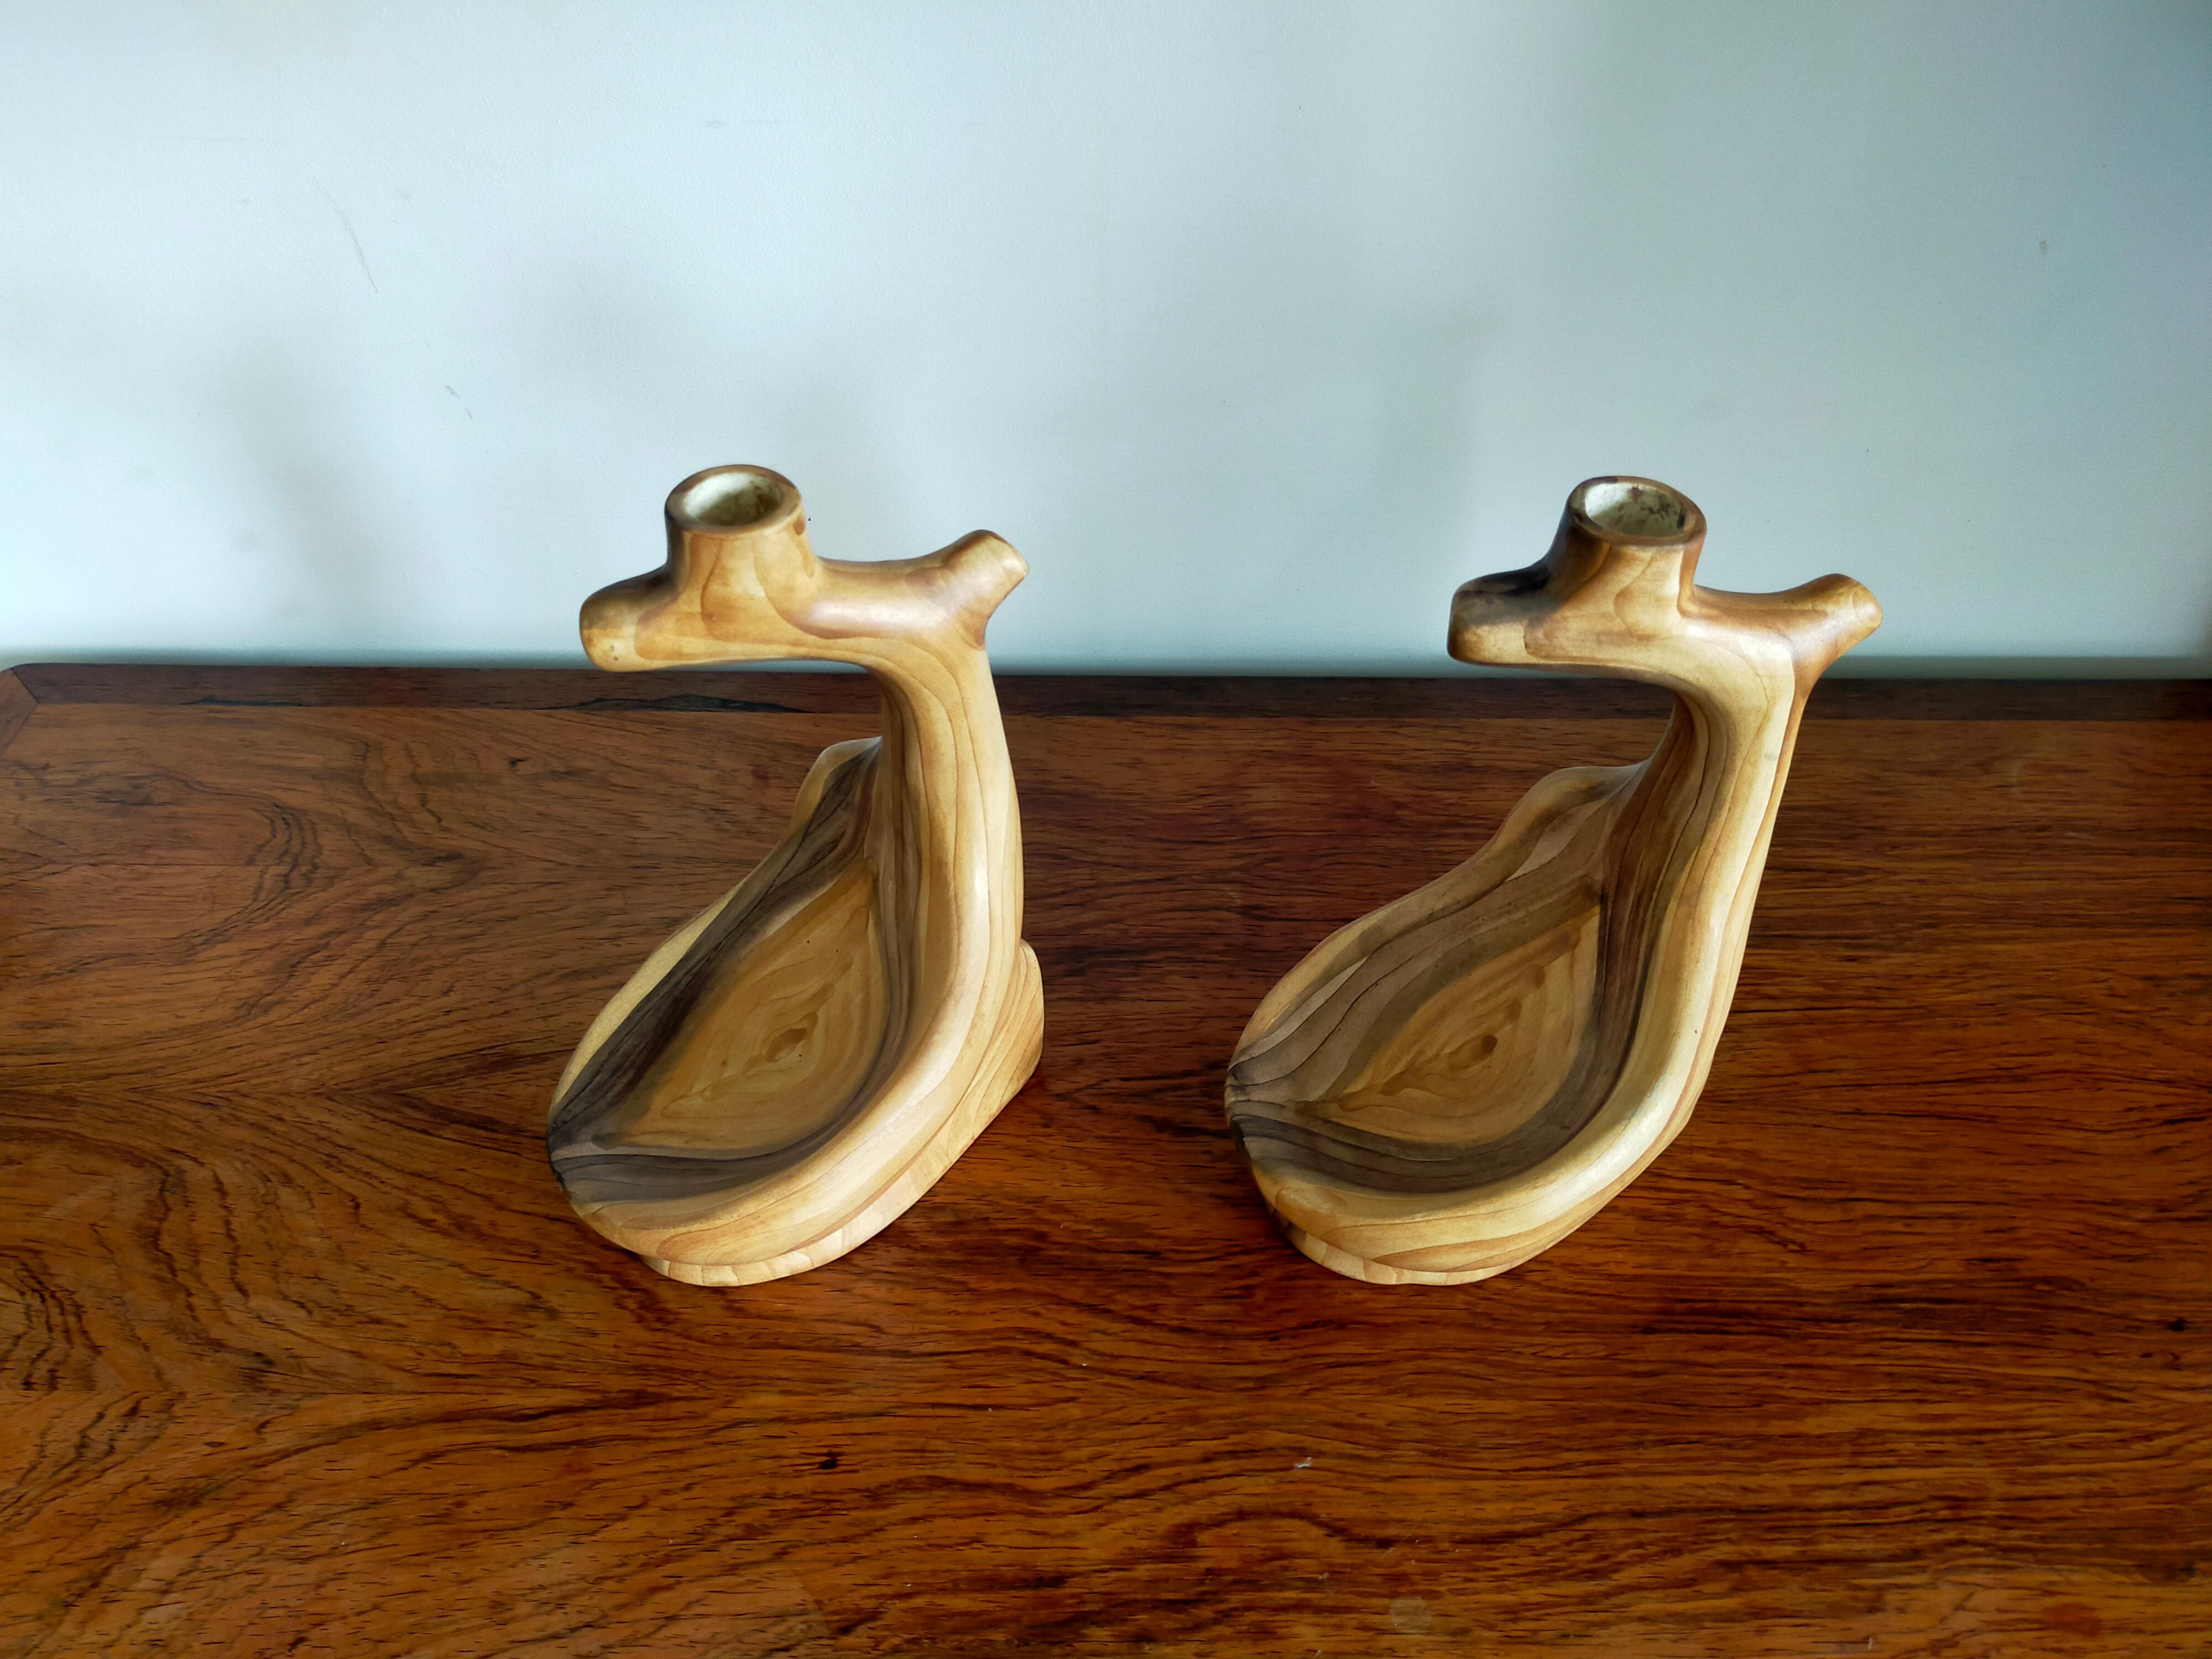 French Pair of Faux Bois Ceramic Candlesticks by Grandjean Jourdan Vallauris For Sale